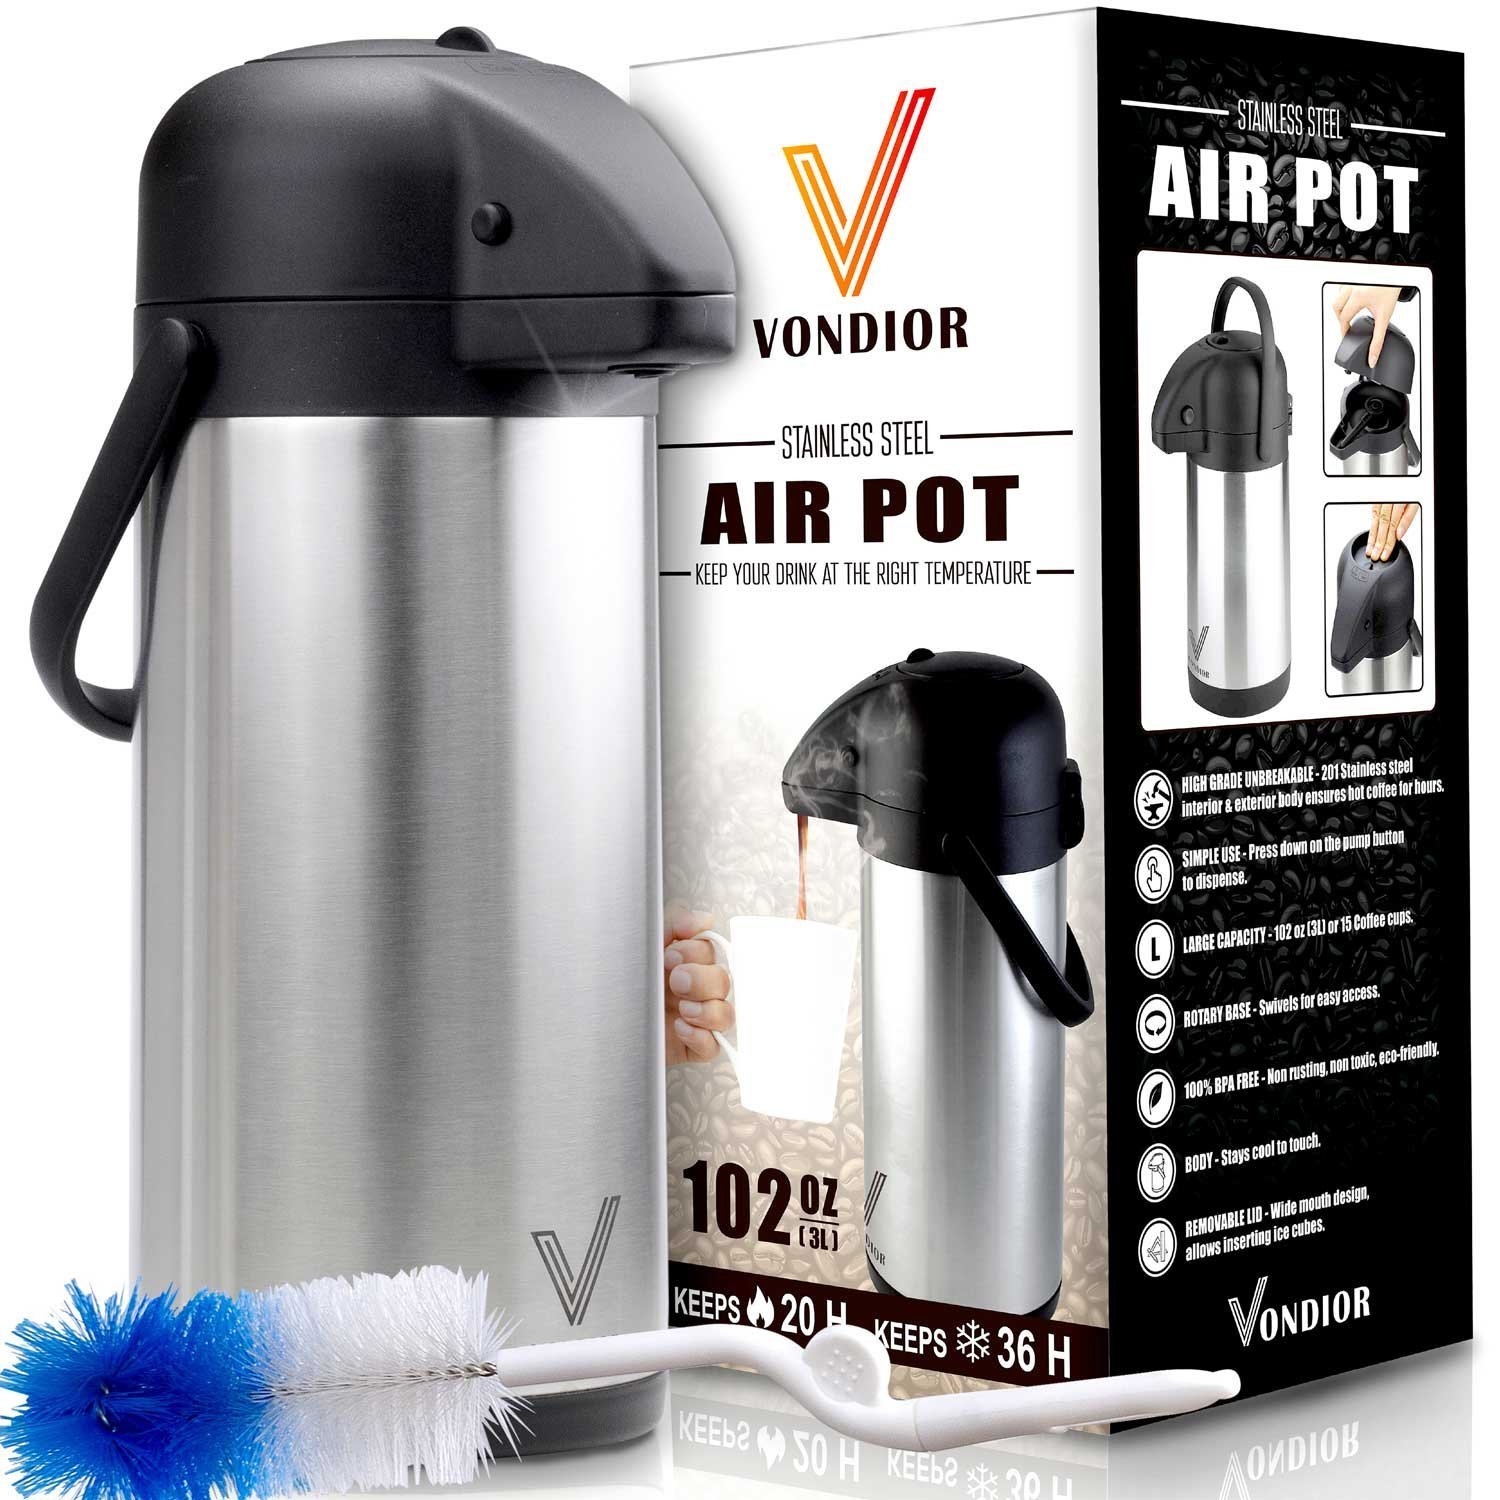 Airpot Coffee Dispenser with Pump - Insulated Stainless Steel Coffee Carafe (102 oz) - Thermal Beverage Dispenser - Thermos Urn for Hot/Cold Water, Party Chocolate Drinks